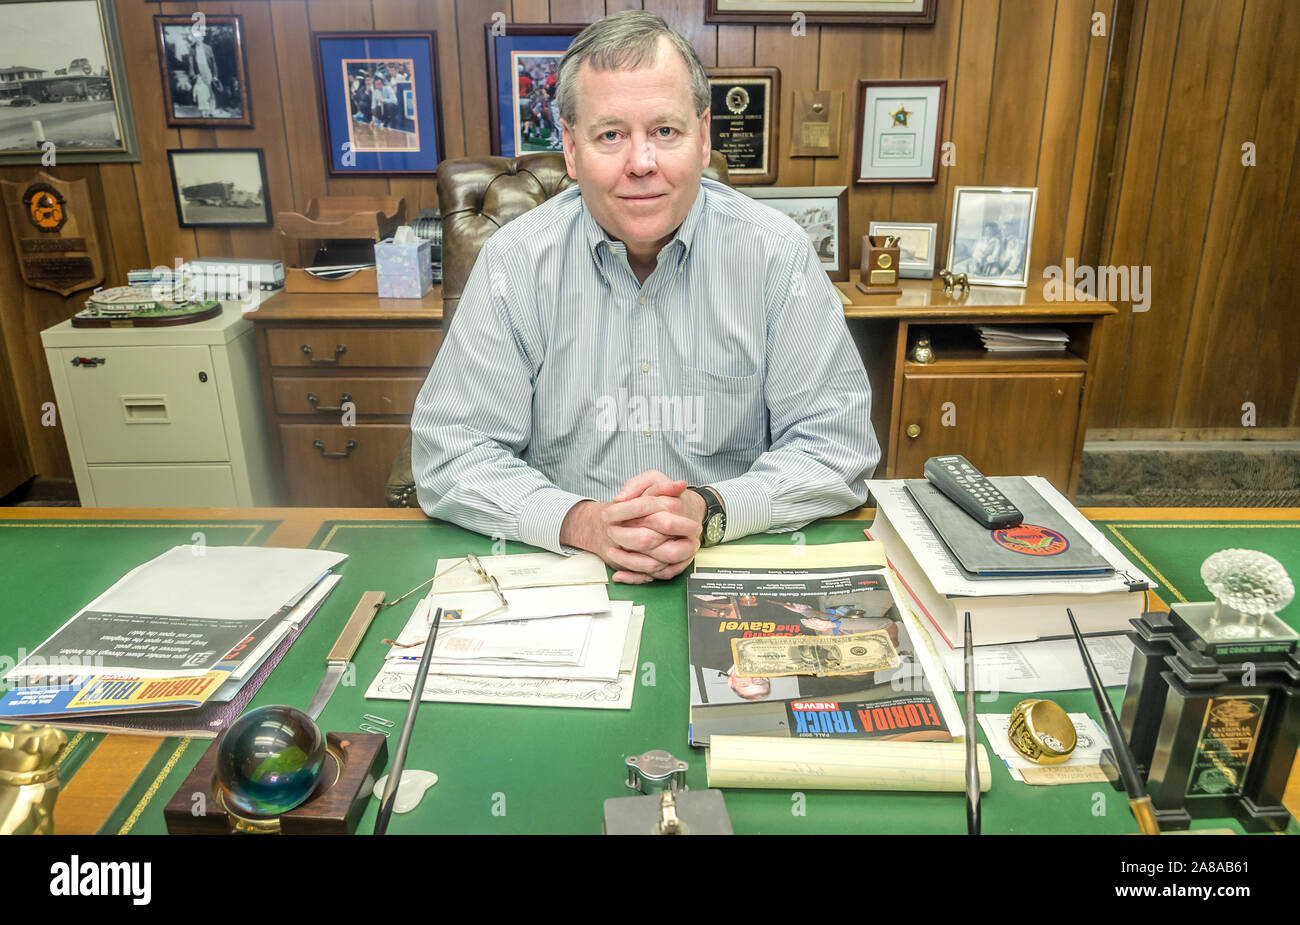 Mark Bostick, president of Comcar Industries, sits at his father’s desk, April 16, 2015, in Auburndale, Florida. Stock Photo